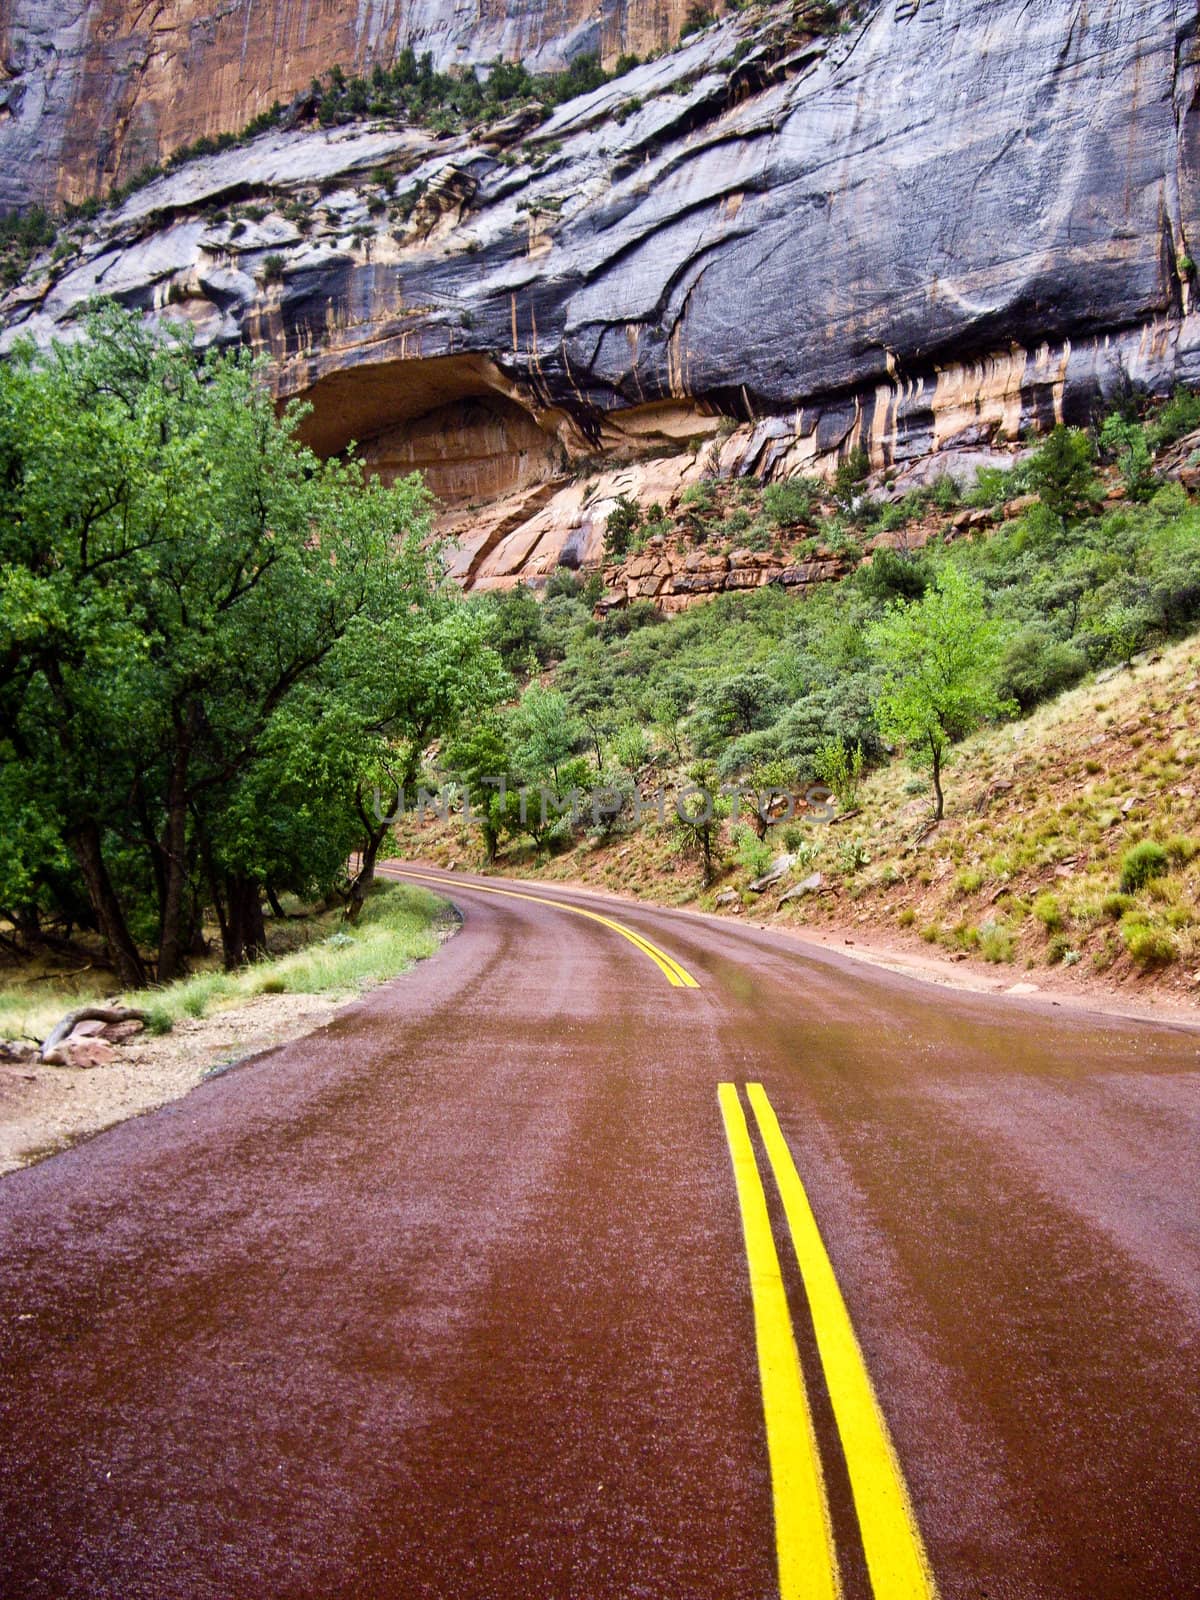 Red Road after the rain in Zion by emattil